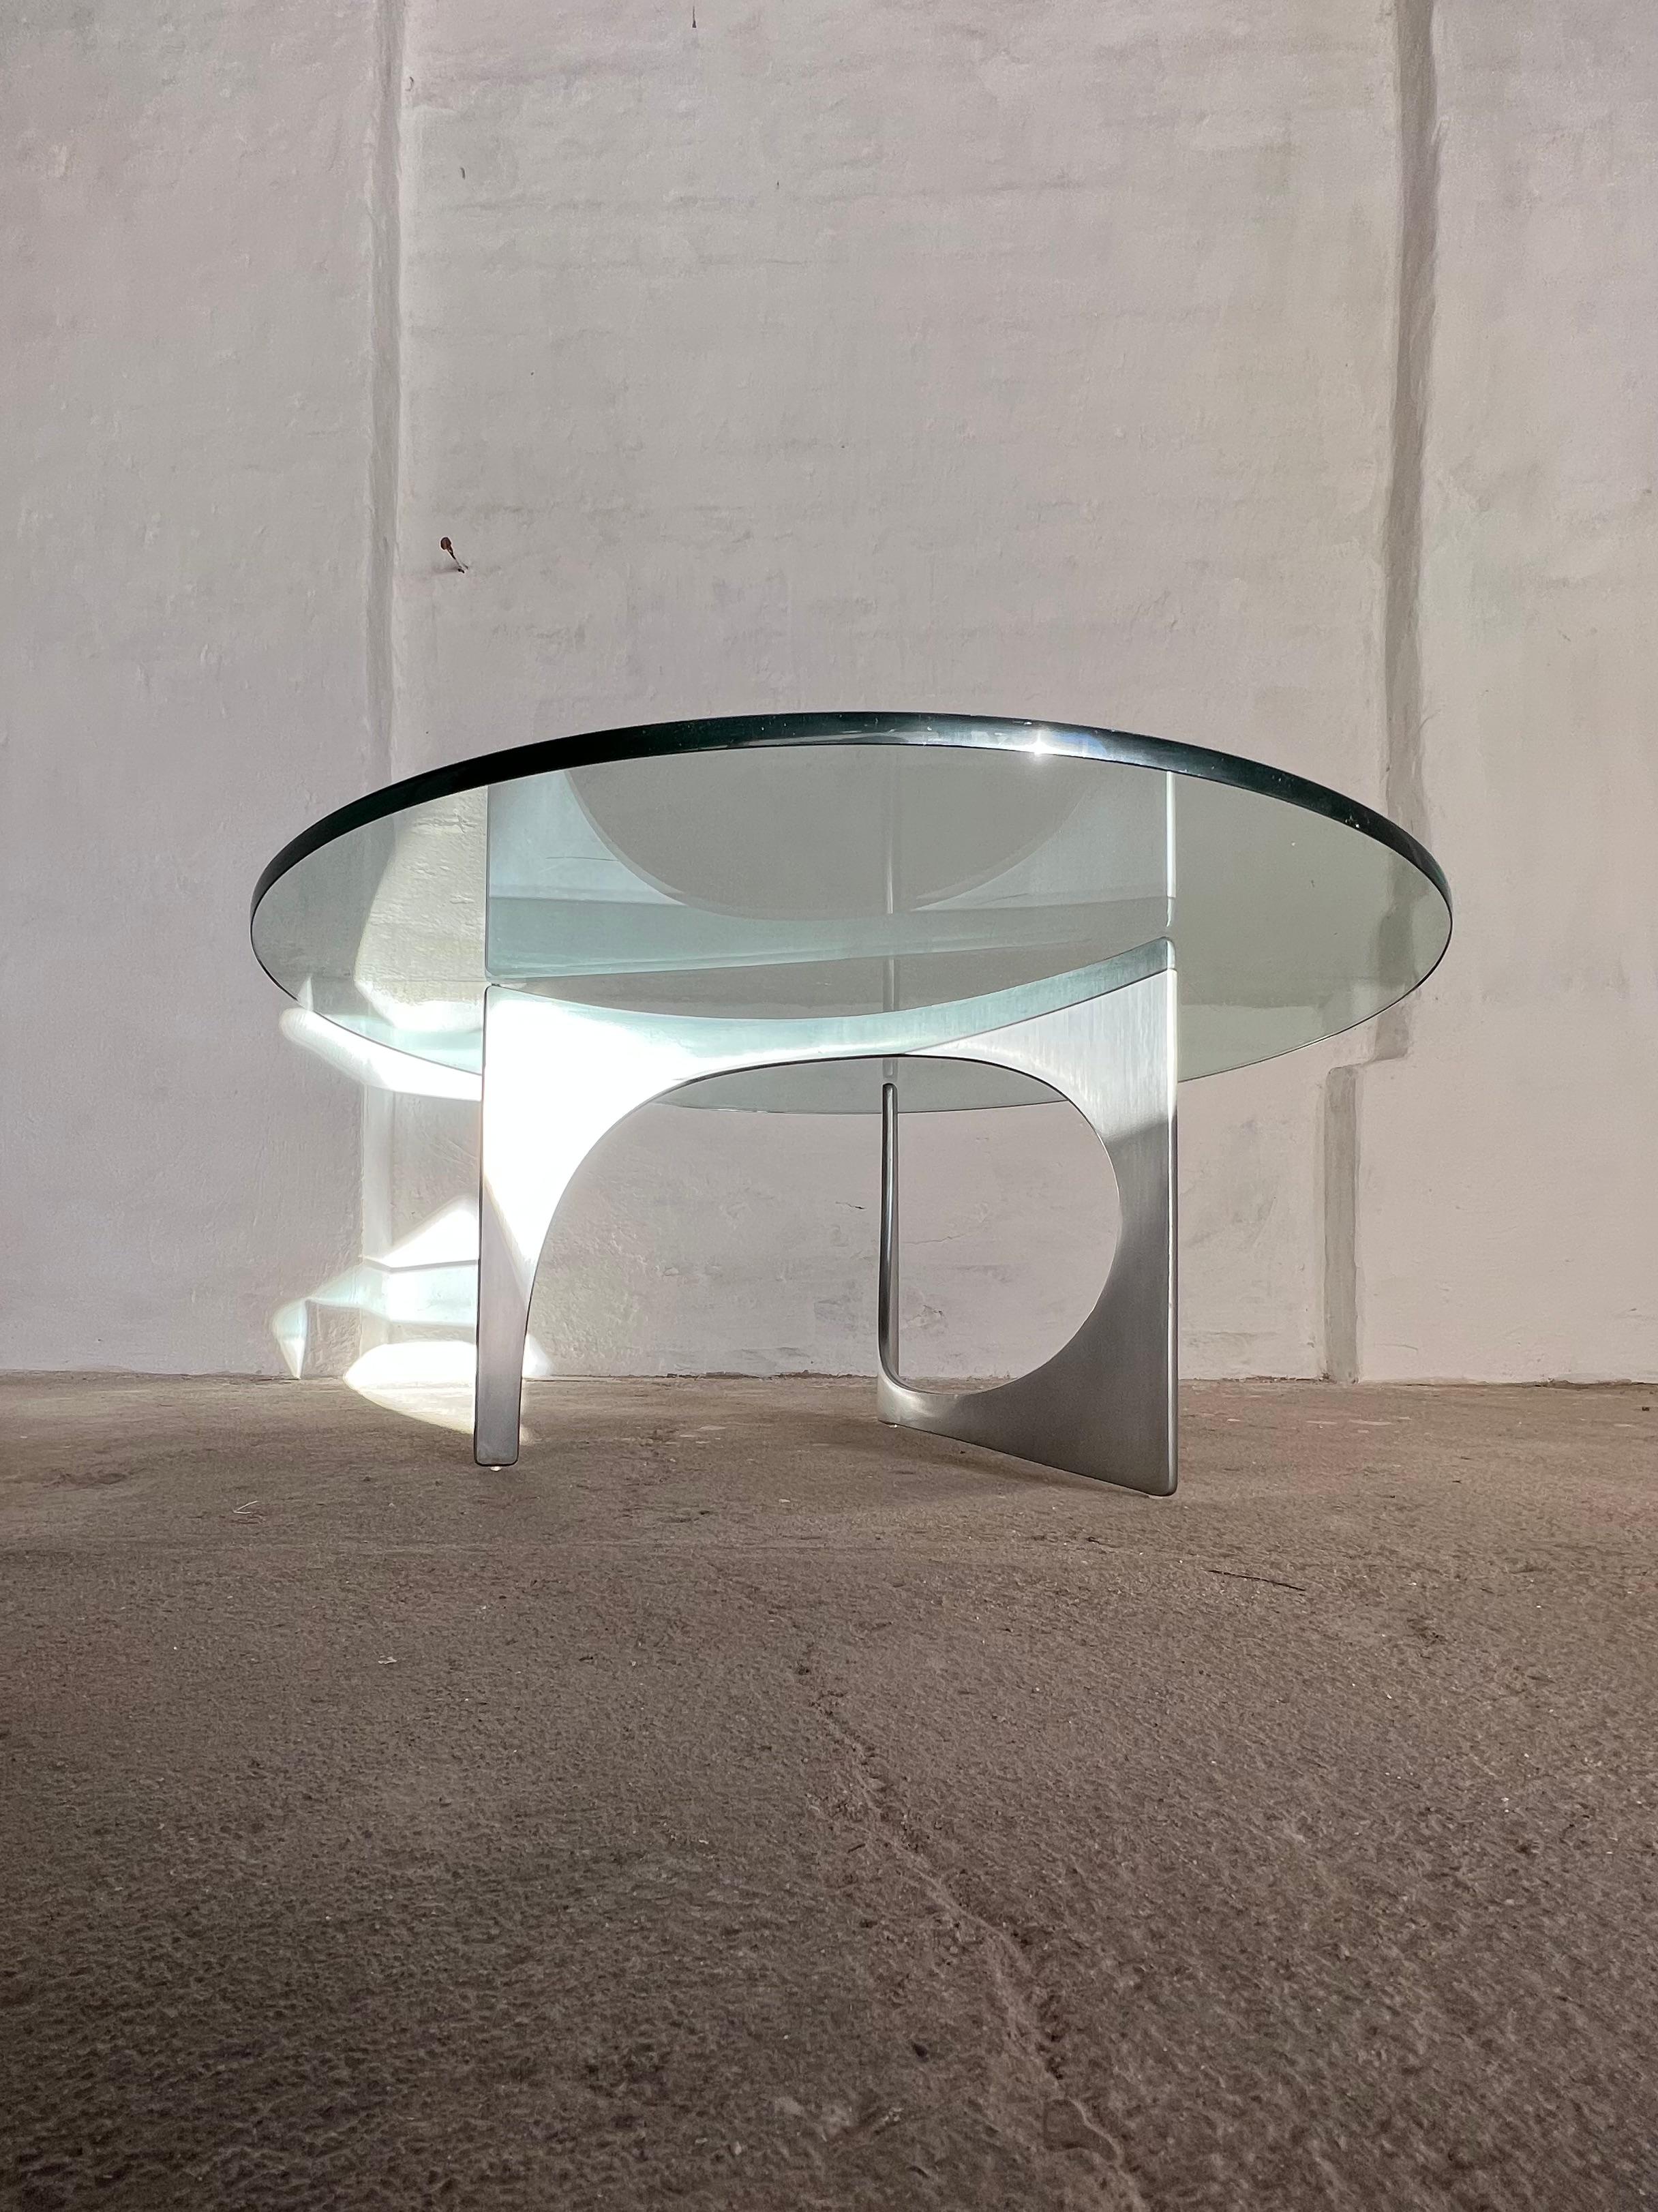 20th Century Sculptural Coffee Table by Knut Hesterberg / Ronald Schmitt, 1960s For Sale